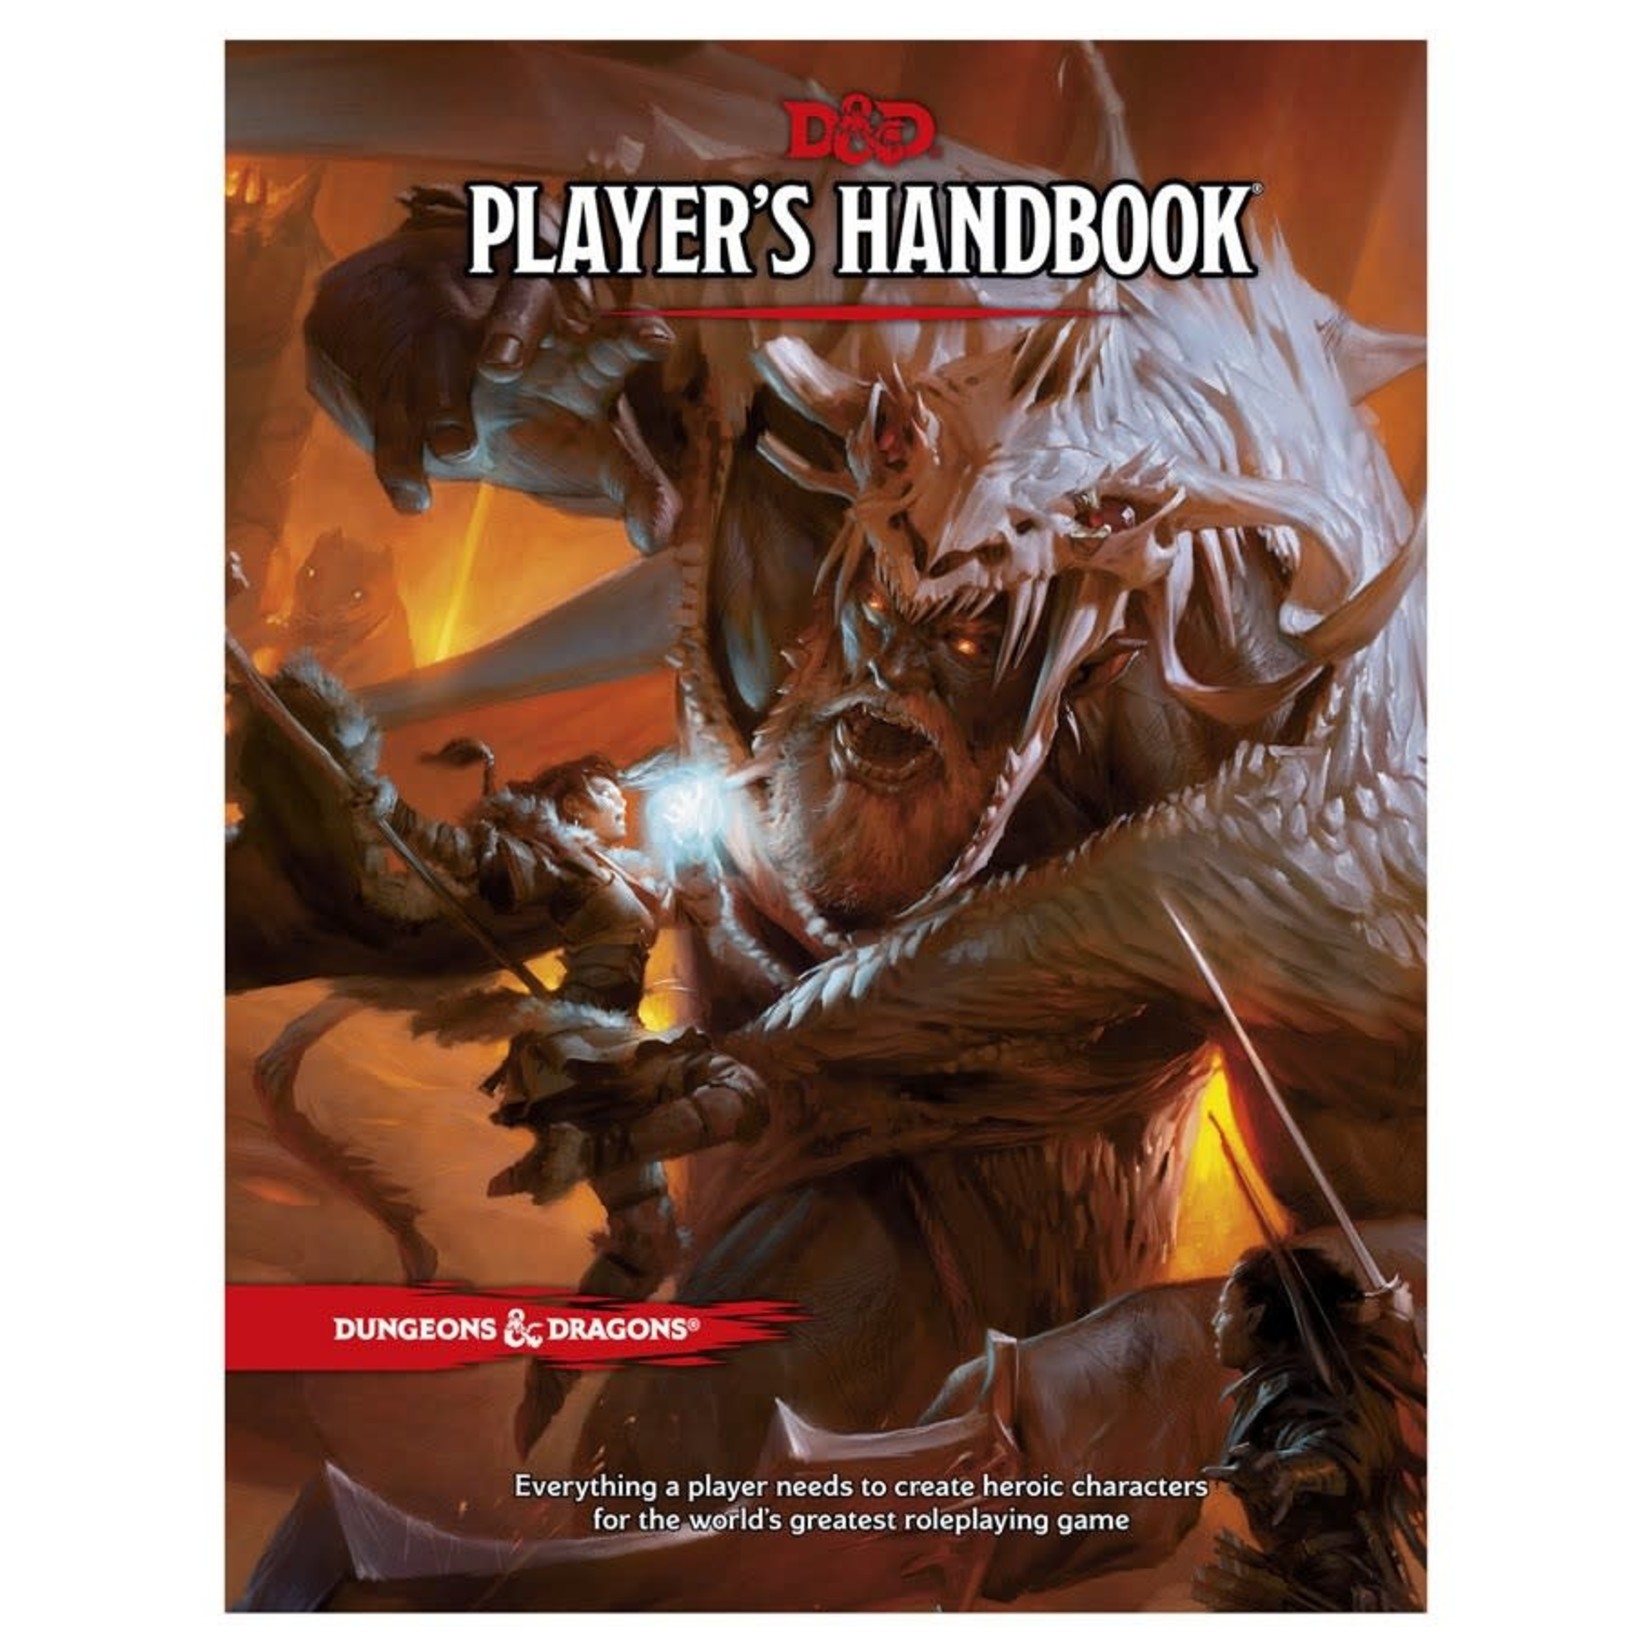 Dungeons & Dragons Dungeons & Dragons – Player's Handbook (5th Edition)